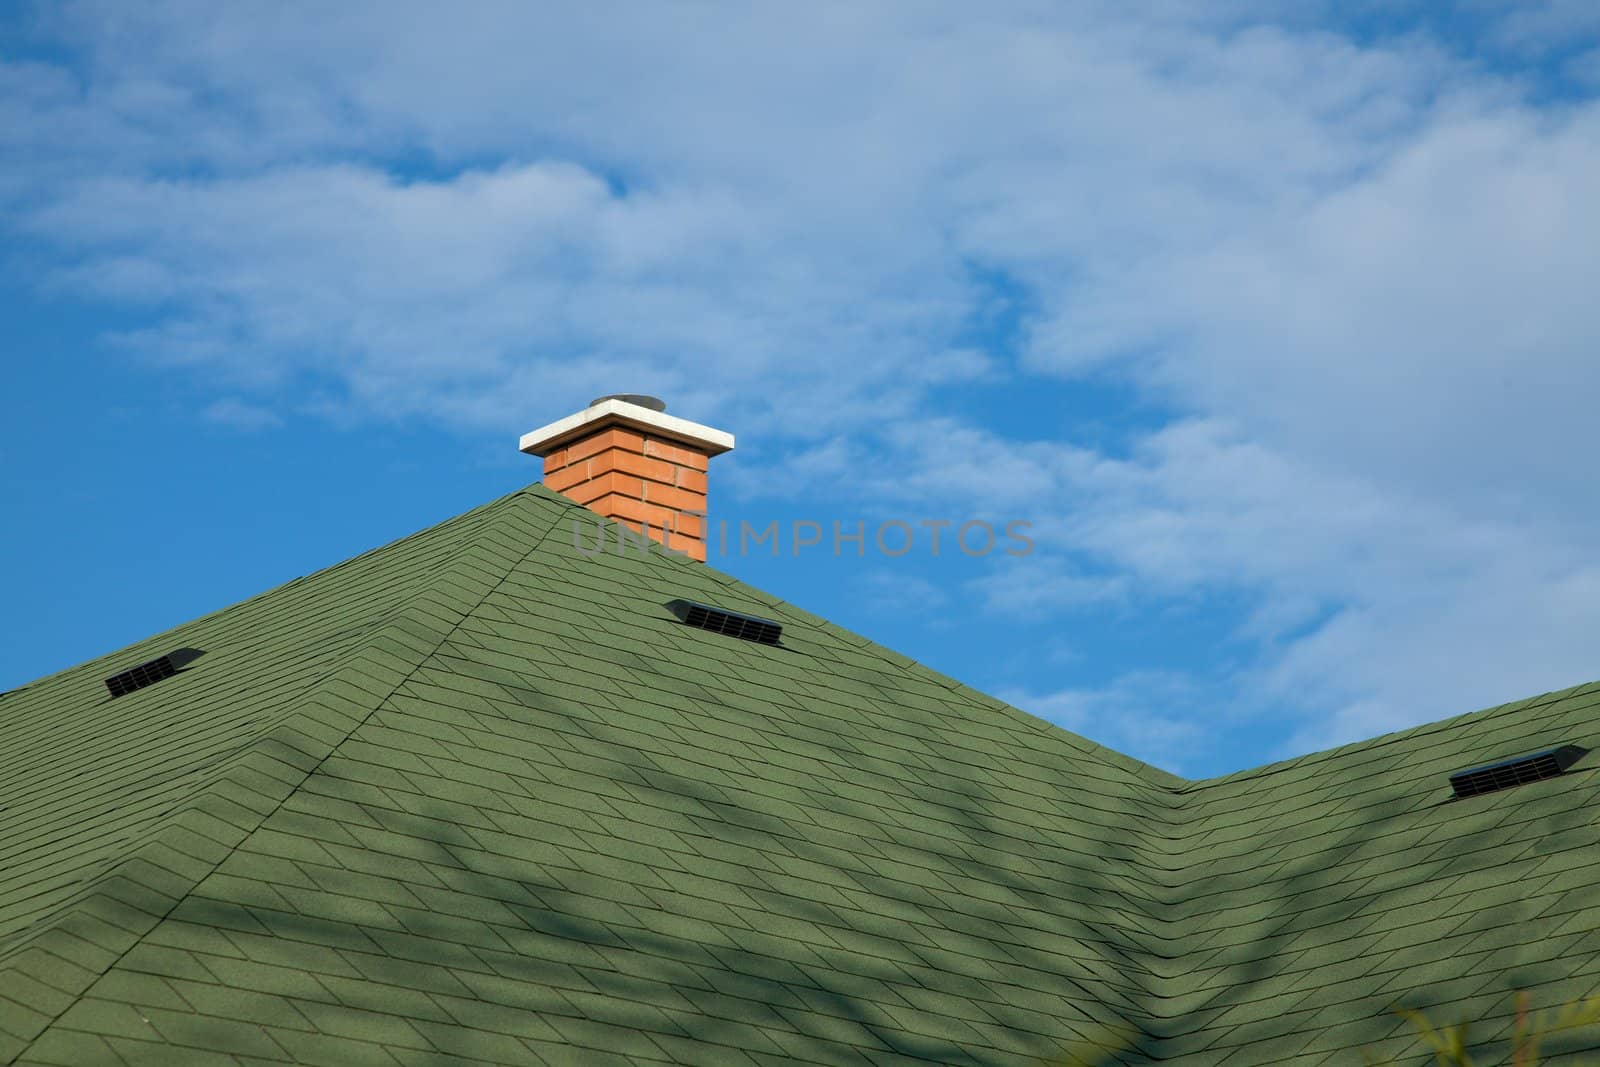 Roof of a house with green tiles